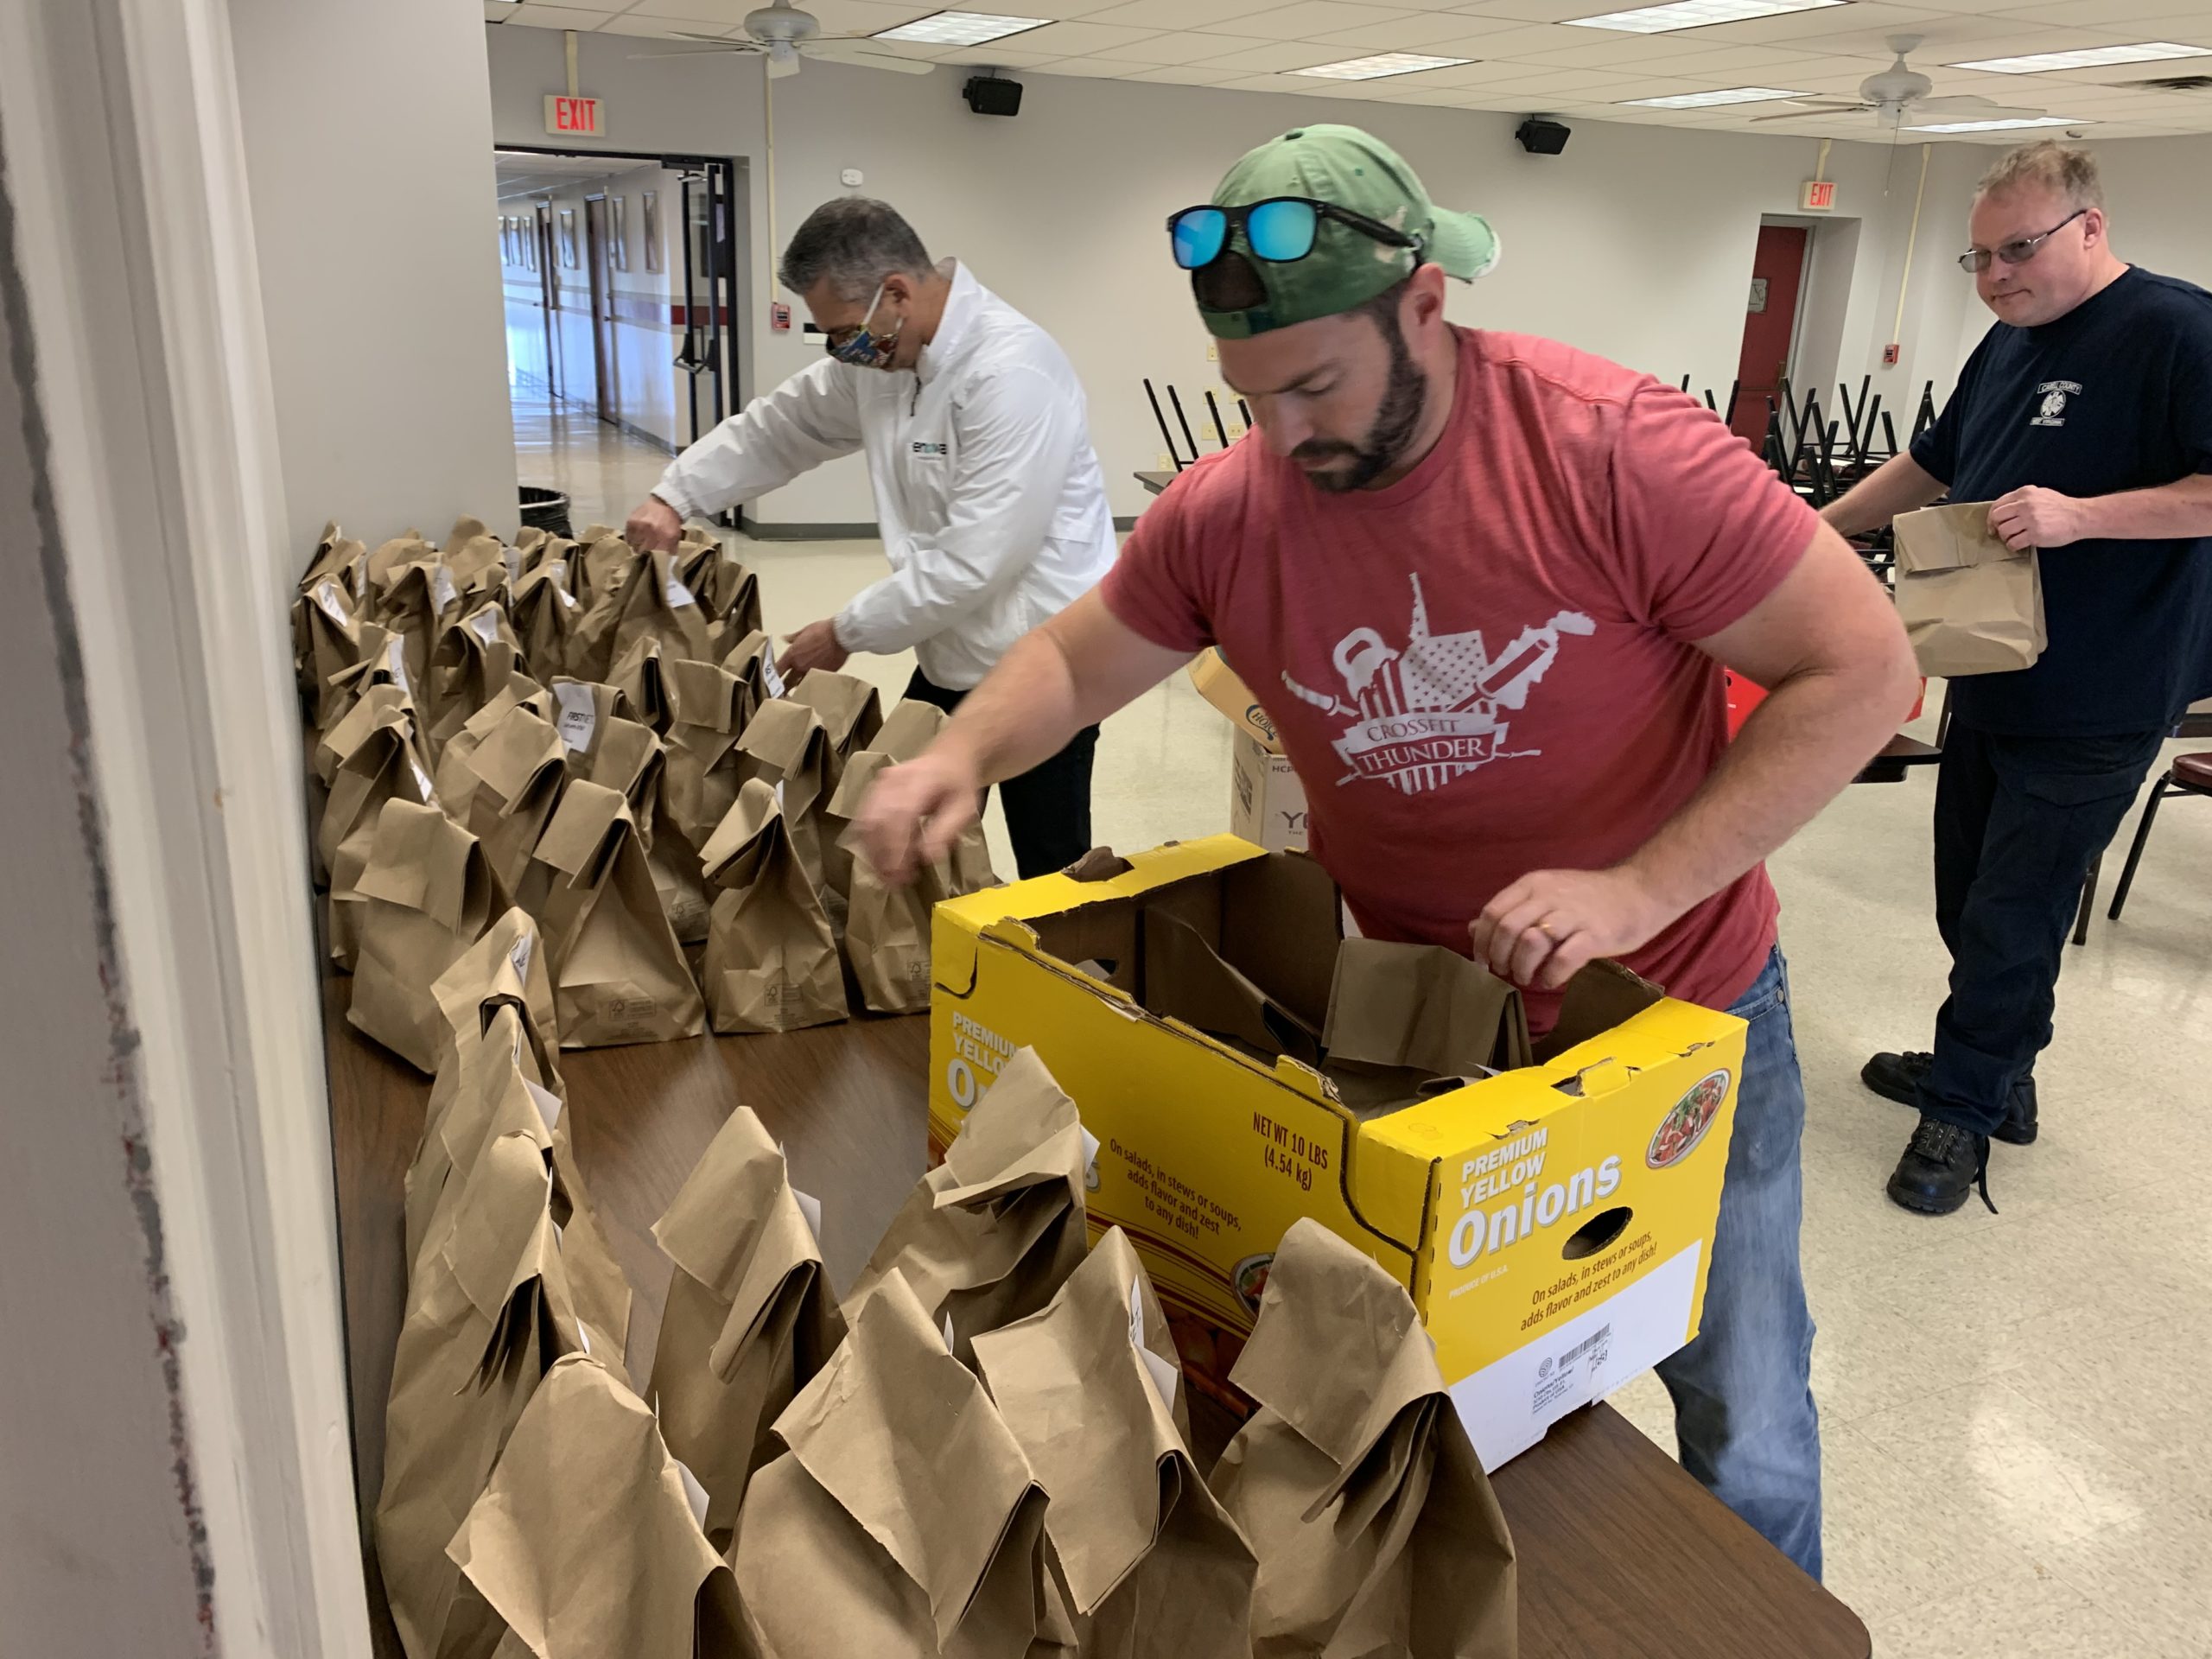 (Left to right) Toney Stroud, an attorney with Encova Insurance and Chair of the Huntington Regional Chamber, joins Drew Hines, owner of Butter It Up in Downtown Huntington, as they deliver boxed lunches to Cabell County EMS workers. 